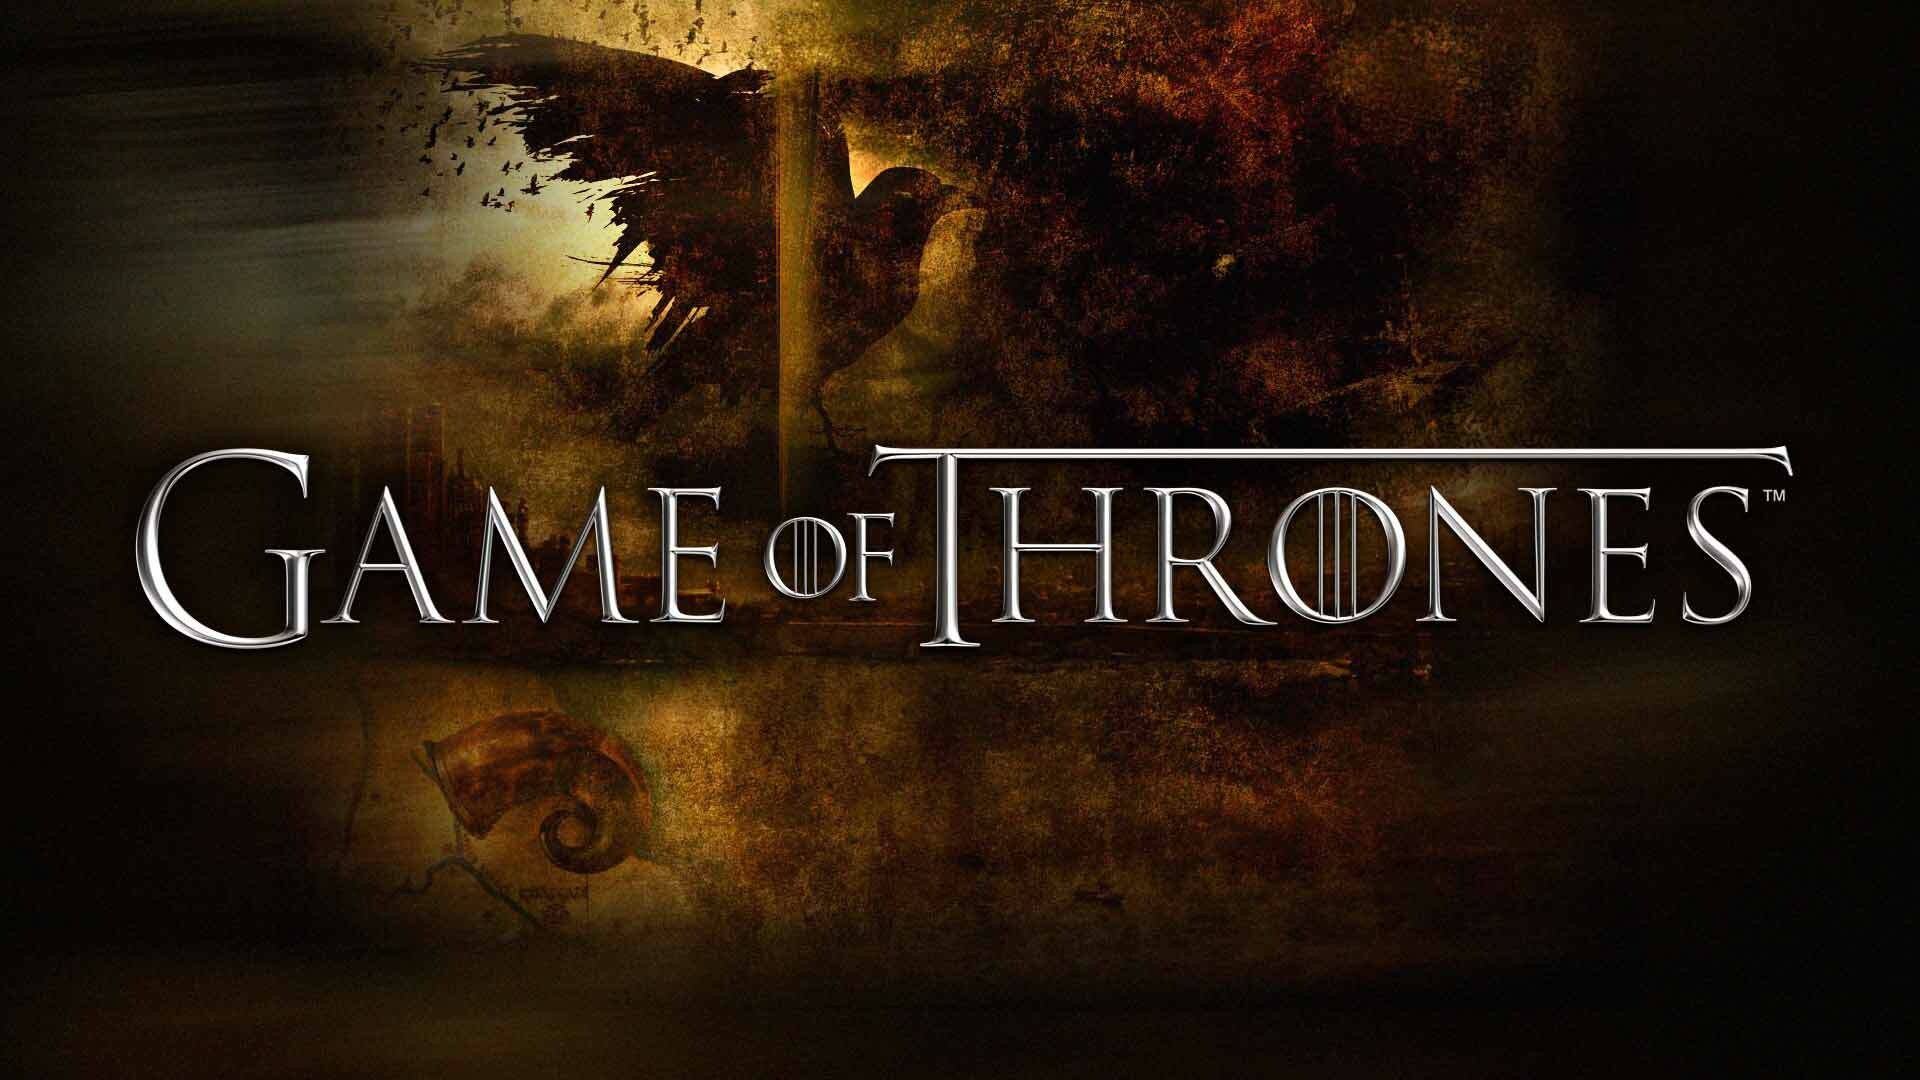 Game of Thrones: The series used seven writers over its six seasons. 1920x1080 Full HD Background.